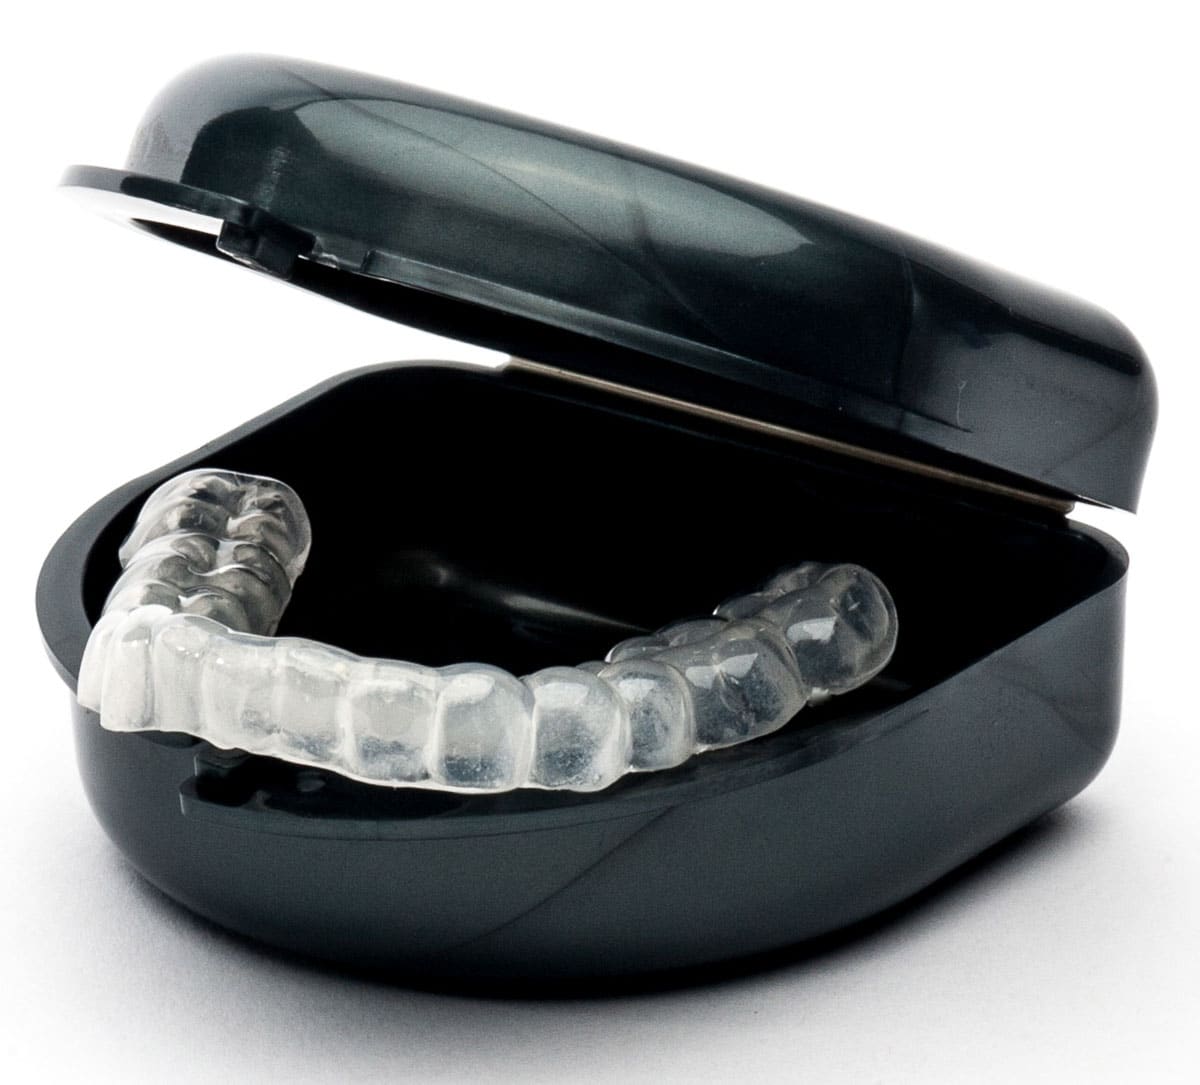 Say Goodbye to Teeth Grinding Woes with Hybrid Night Guards